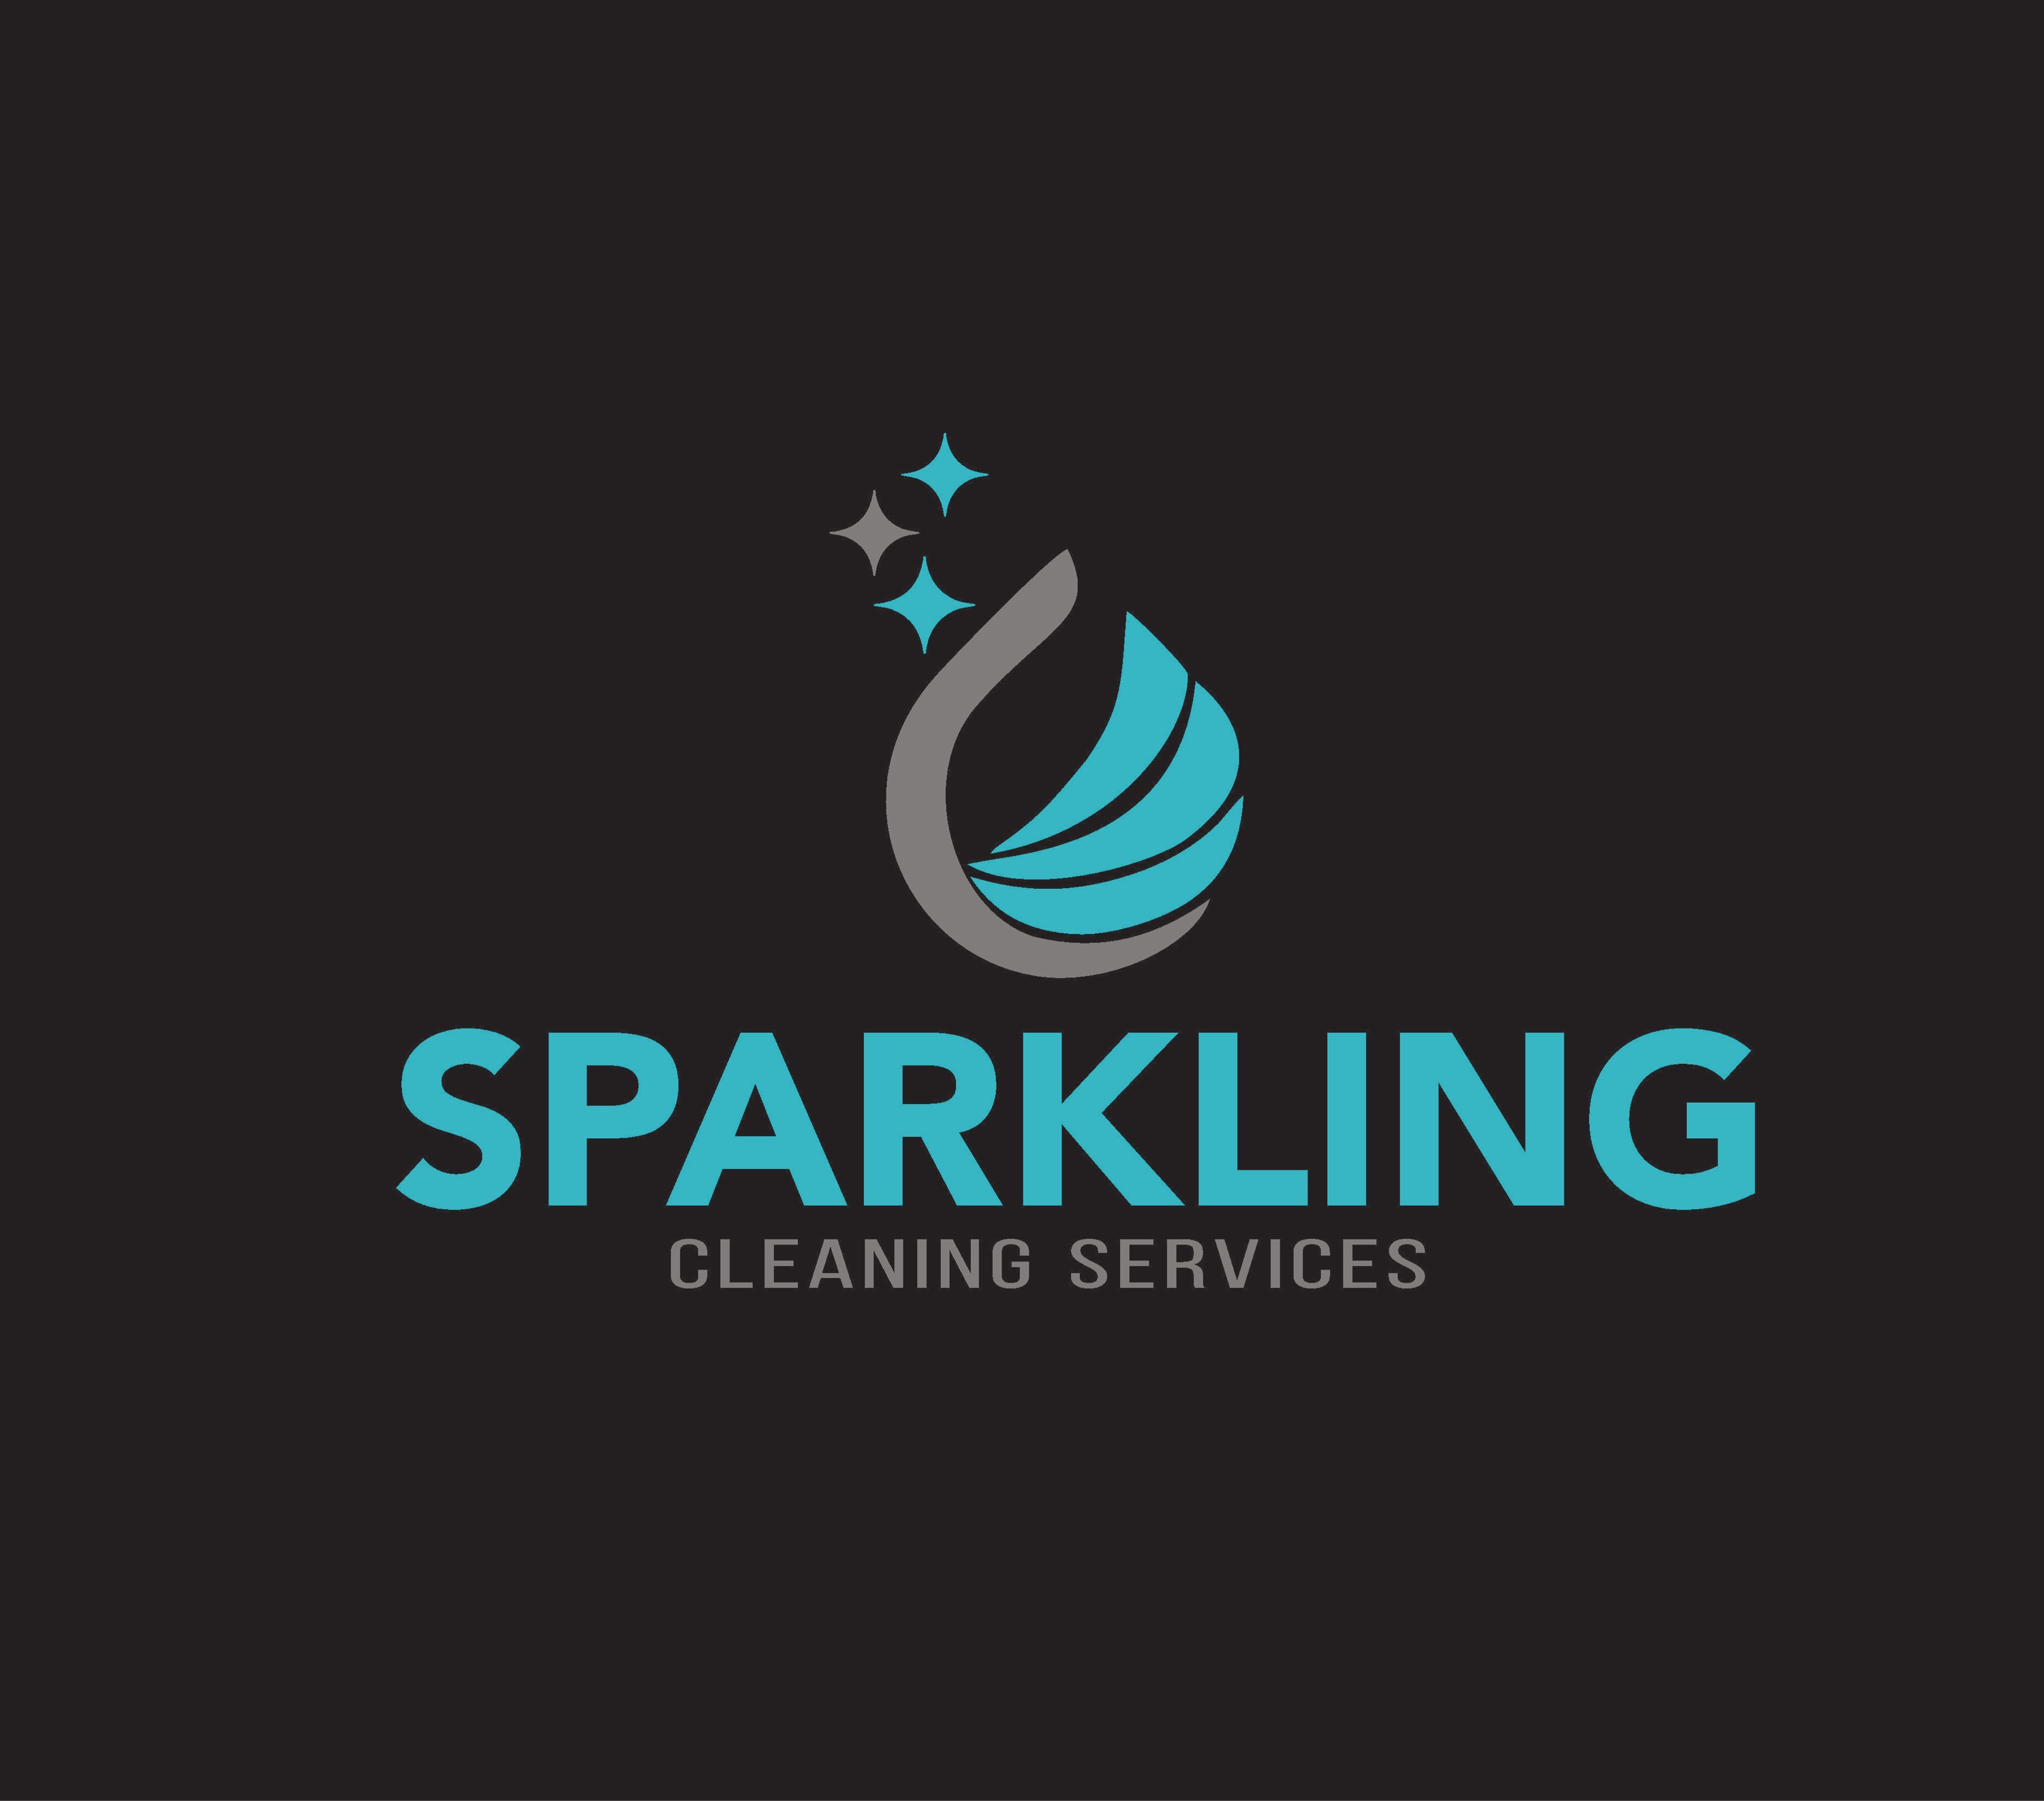 Sparkling Cleaning Services By Yary, LLC Logo